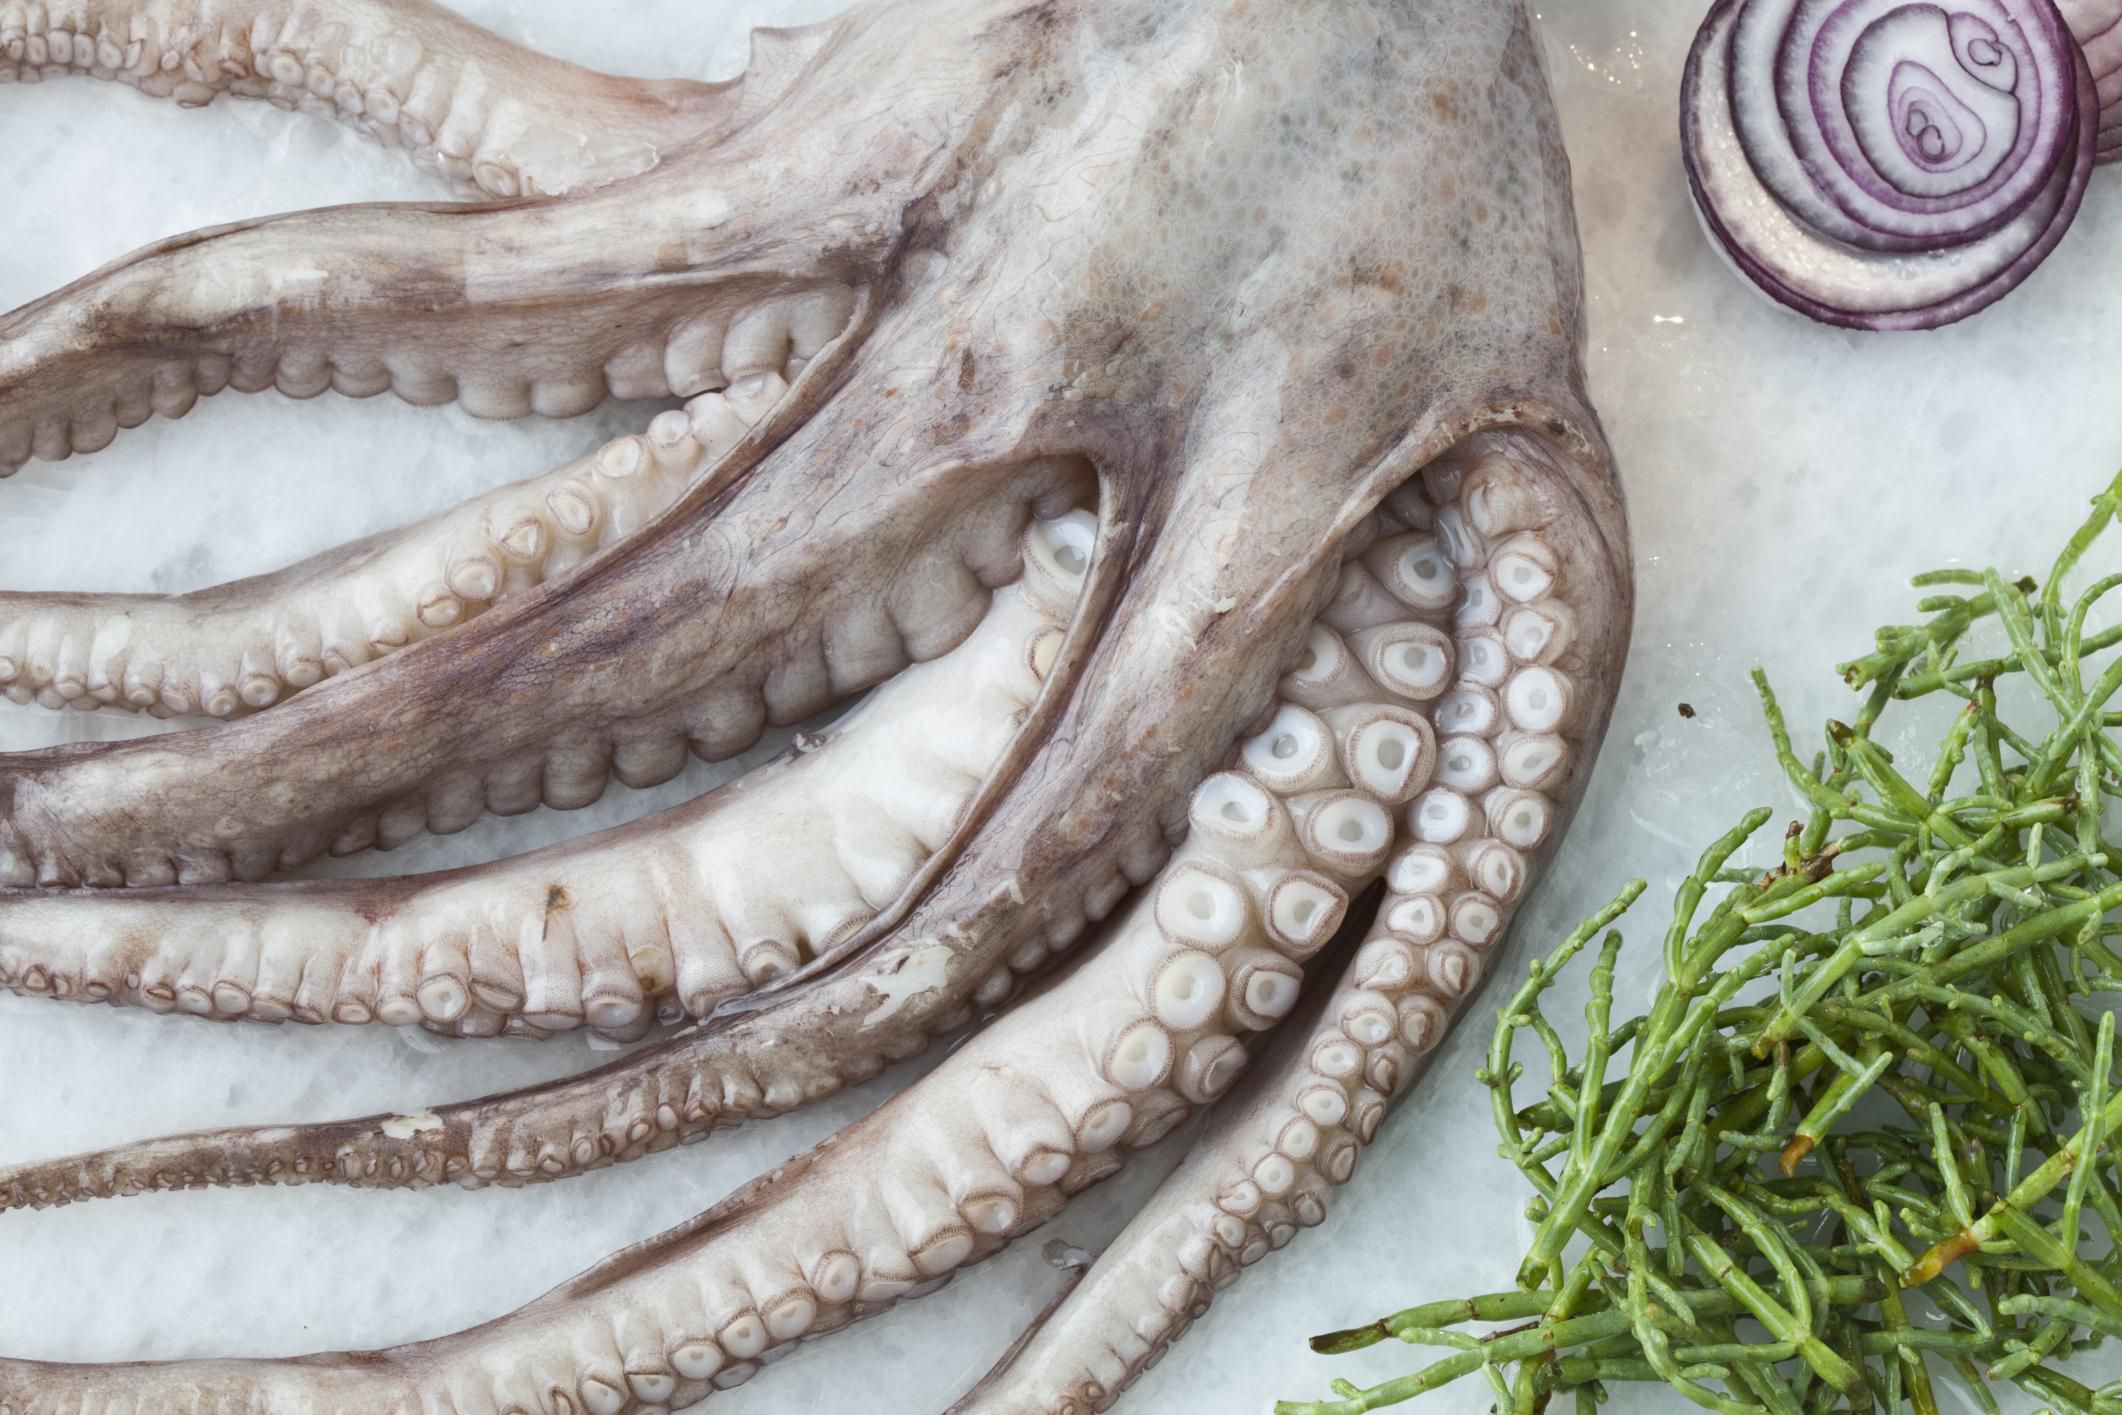 How to Prepare Octopus for Cooking Later